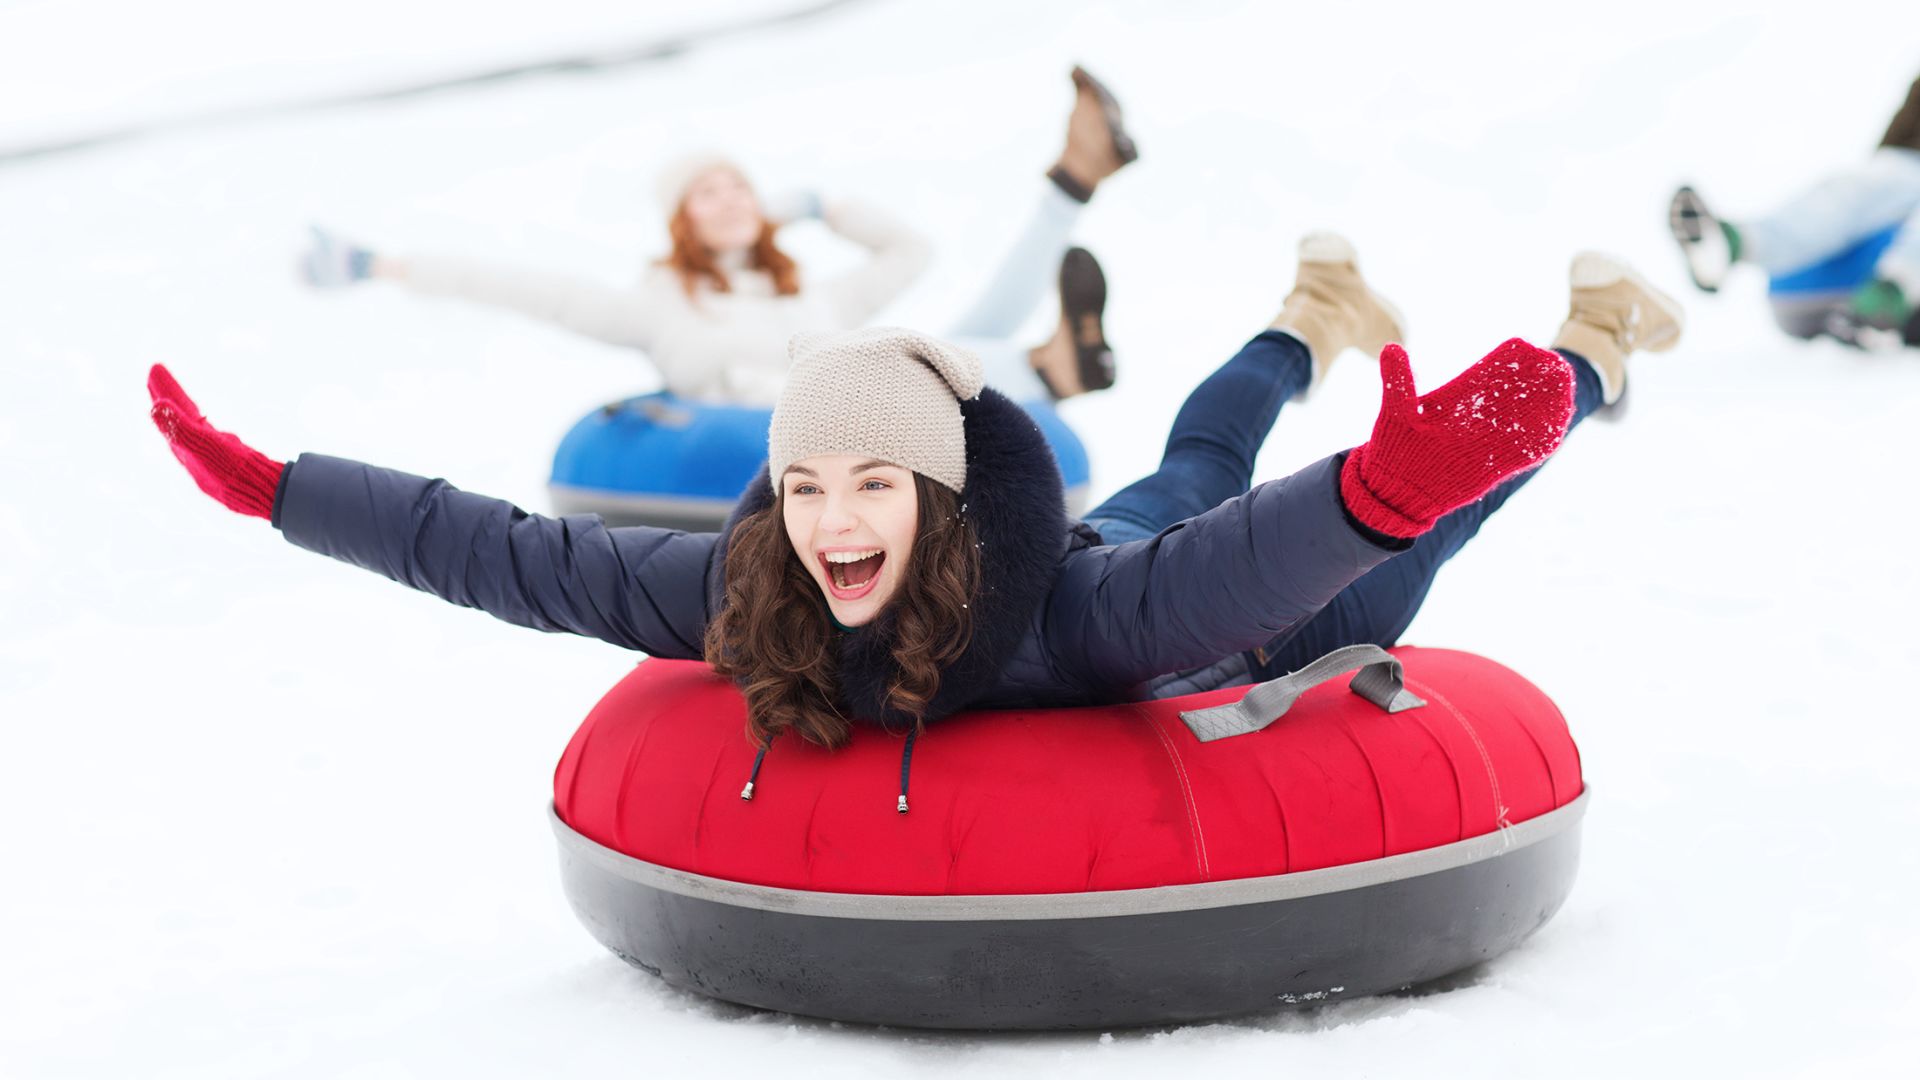 Girl snow tubing with her arms out